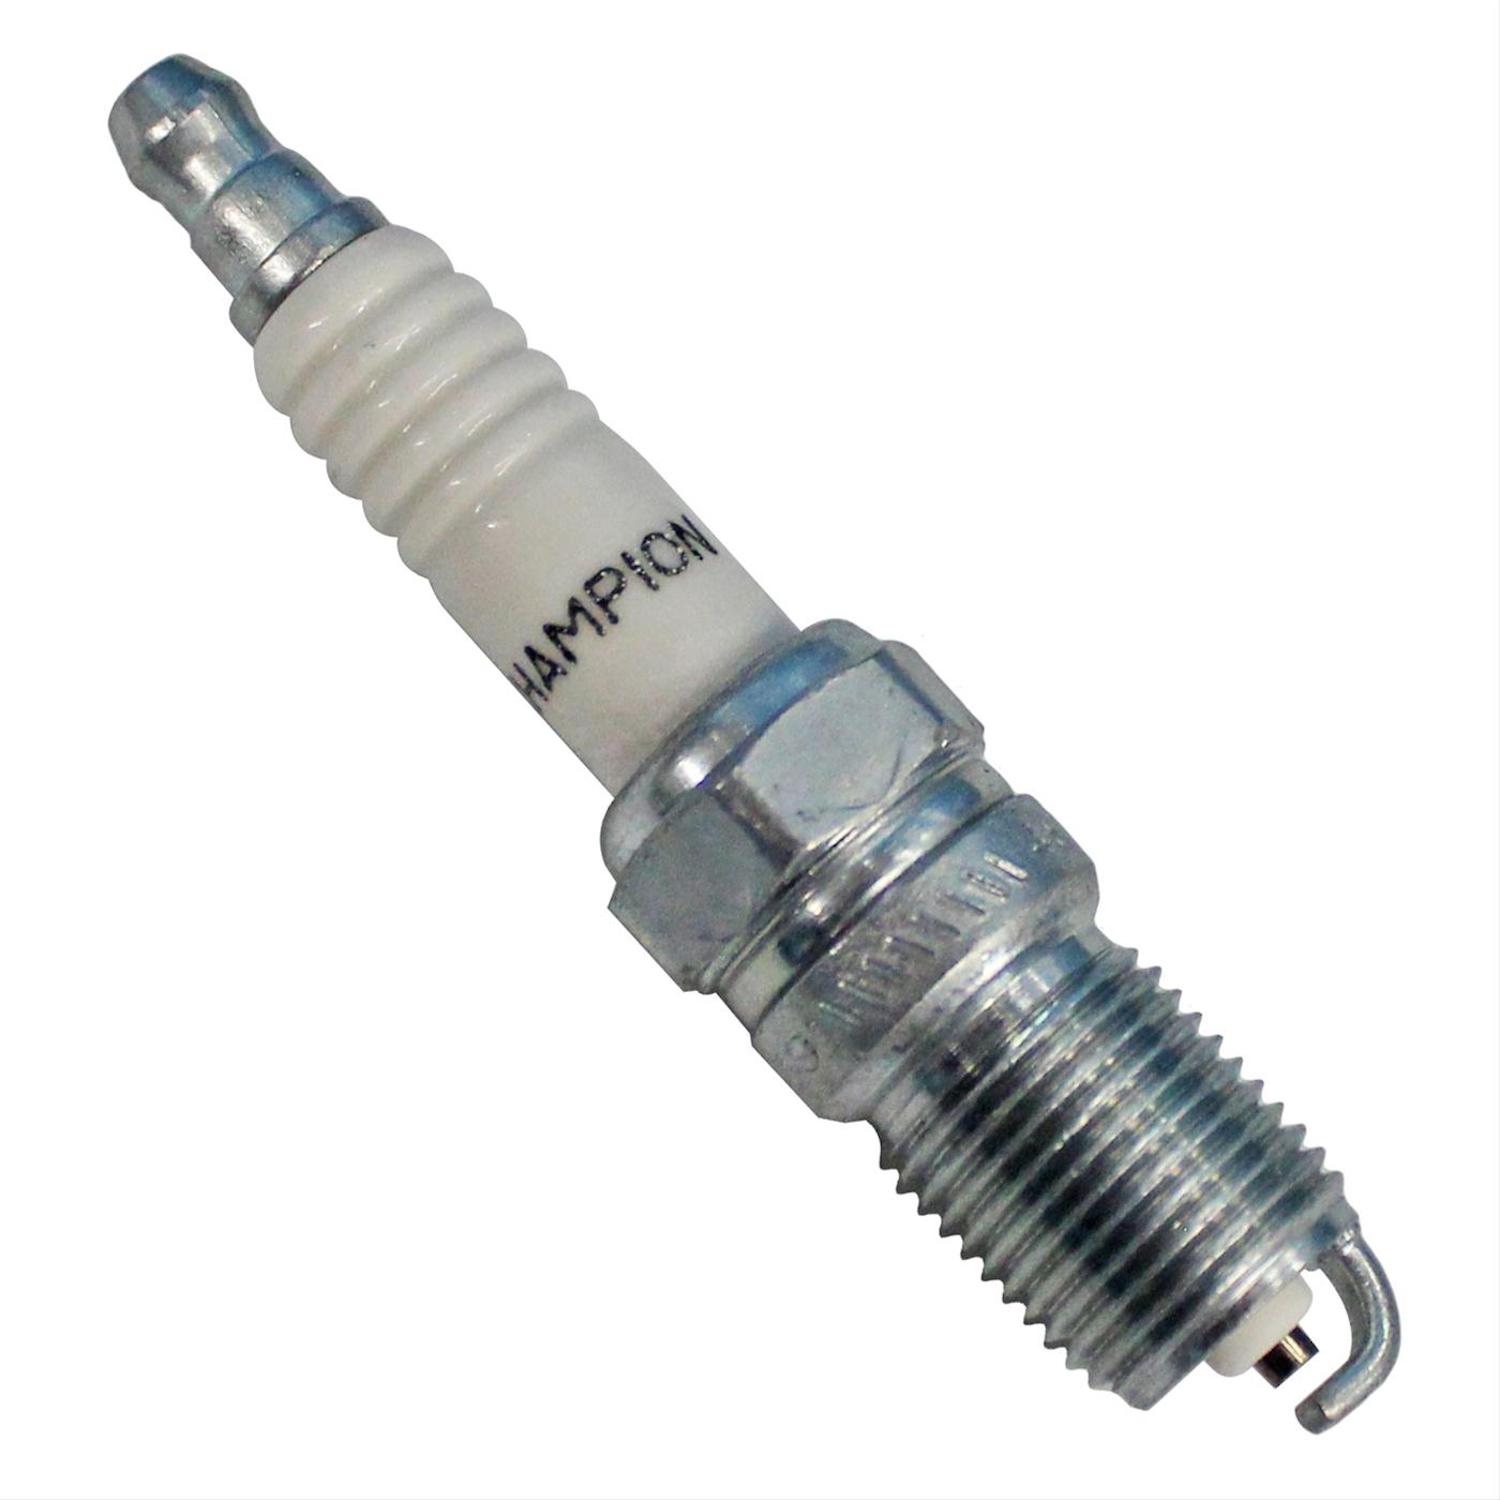 Promo photo of a Champion spark plug against a white background.